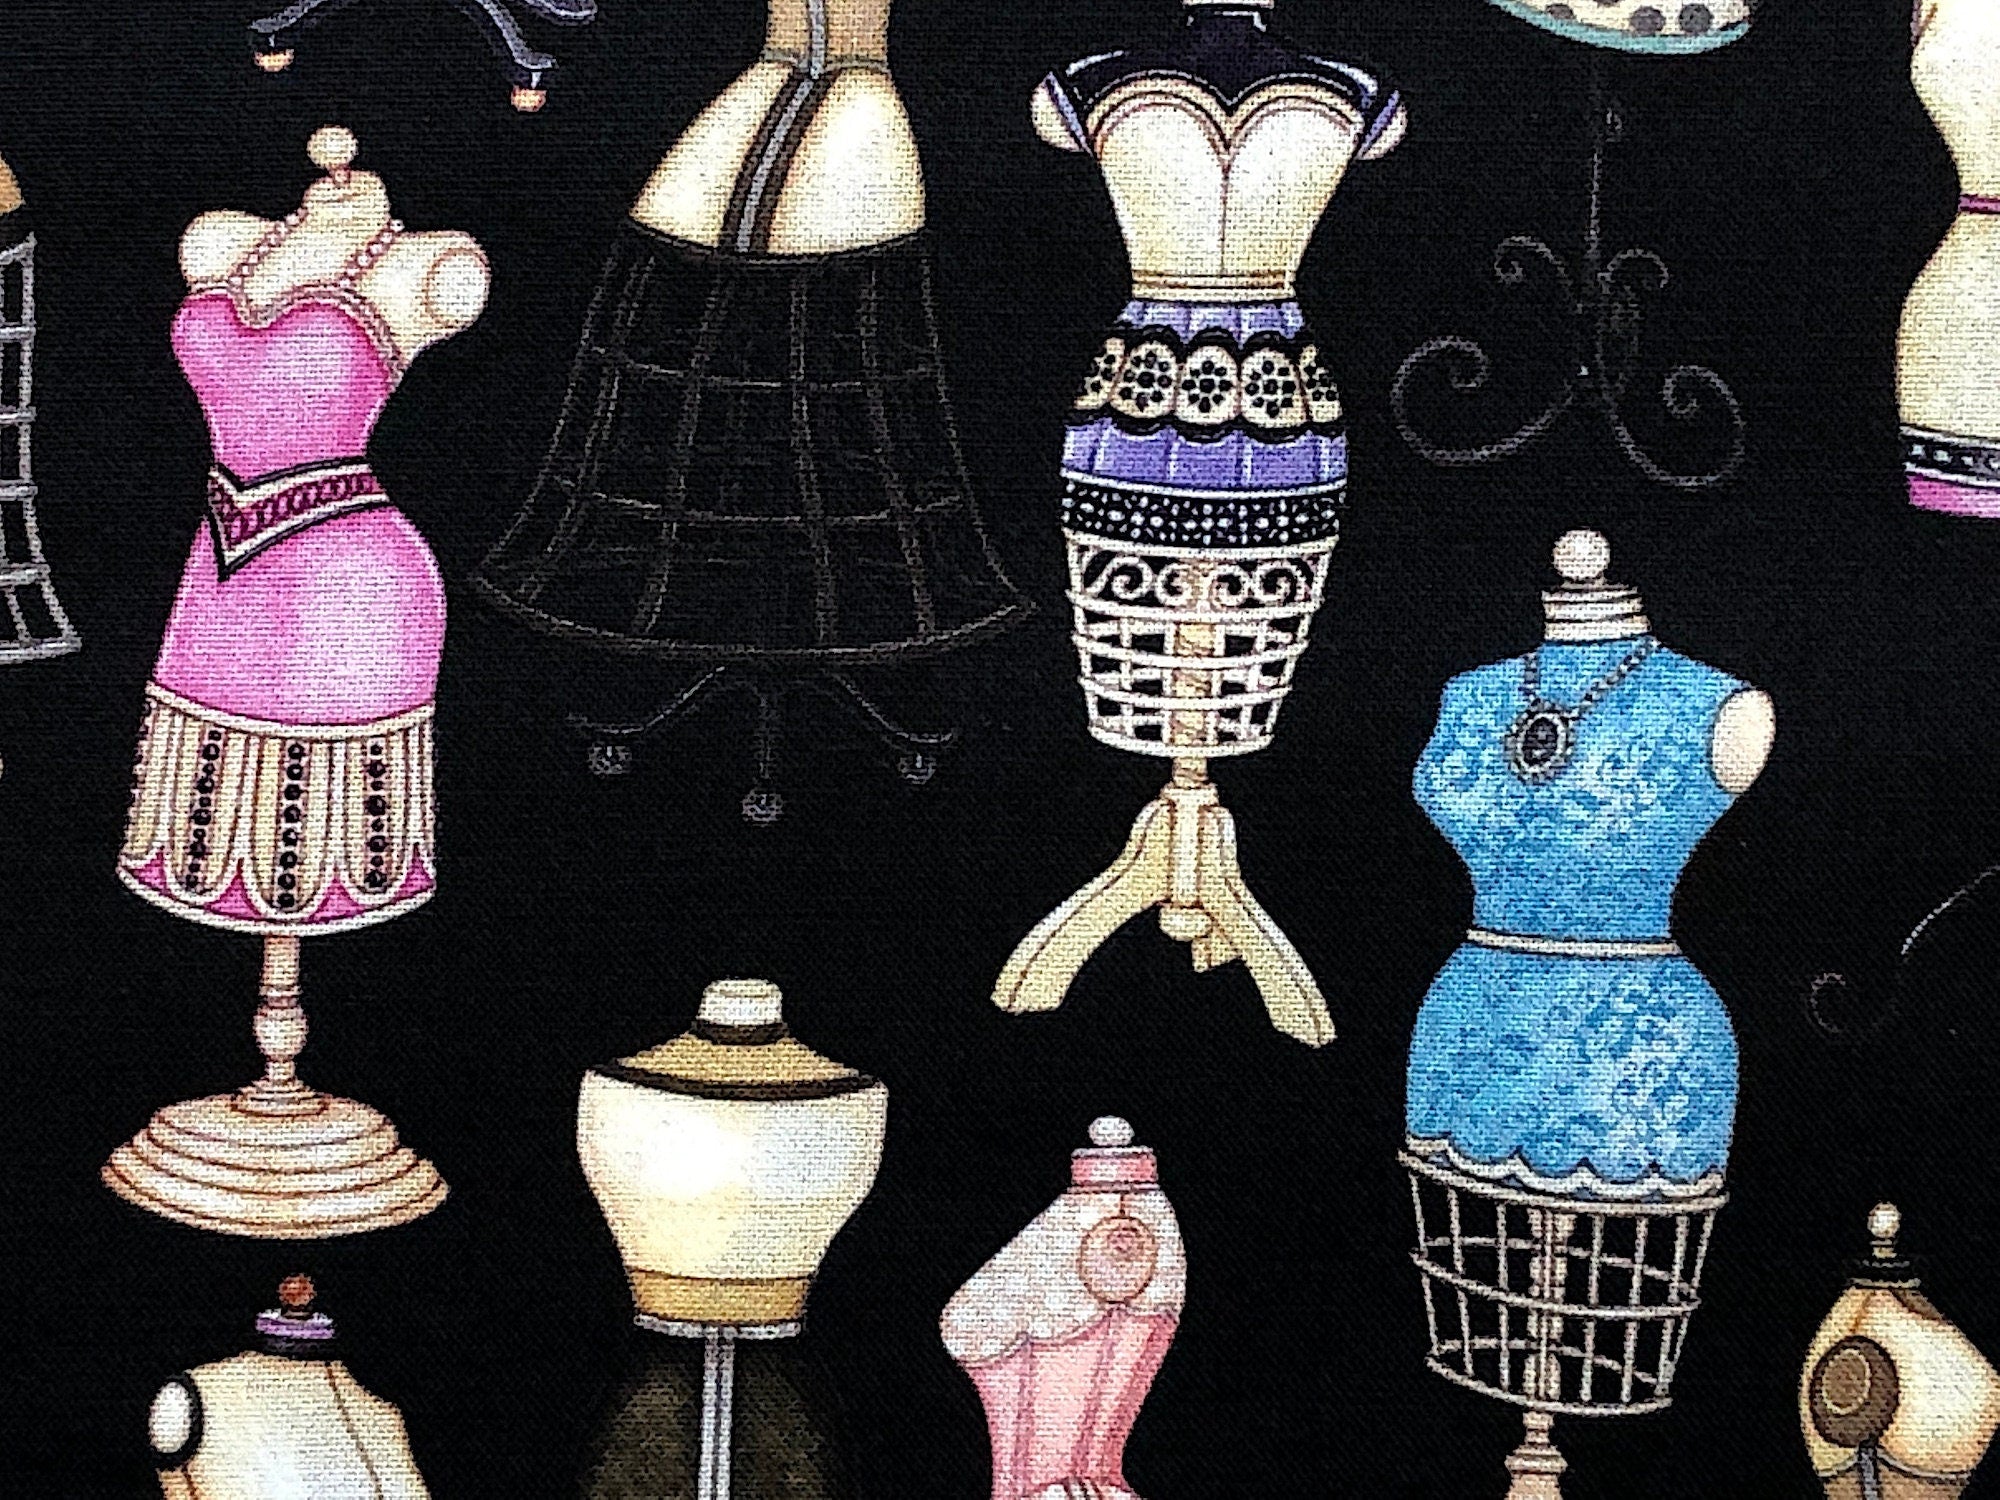 This fabric is part of the Tailor Made collection. This black cotton fabric is covered with dress forms. The dress forms have various styles of dresses on them that are pink, green, blue and lavender.